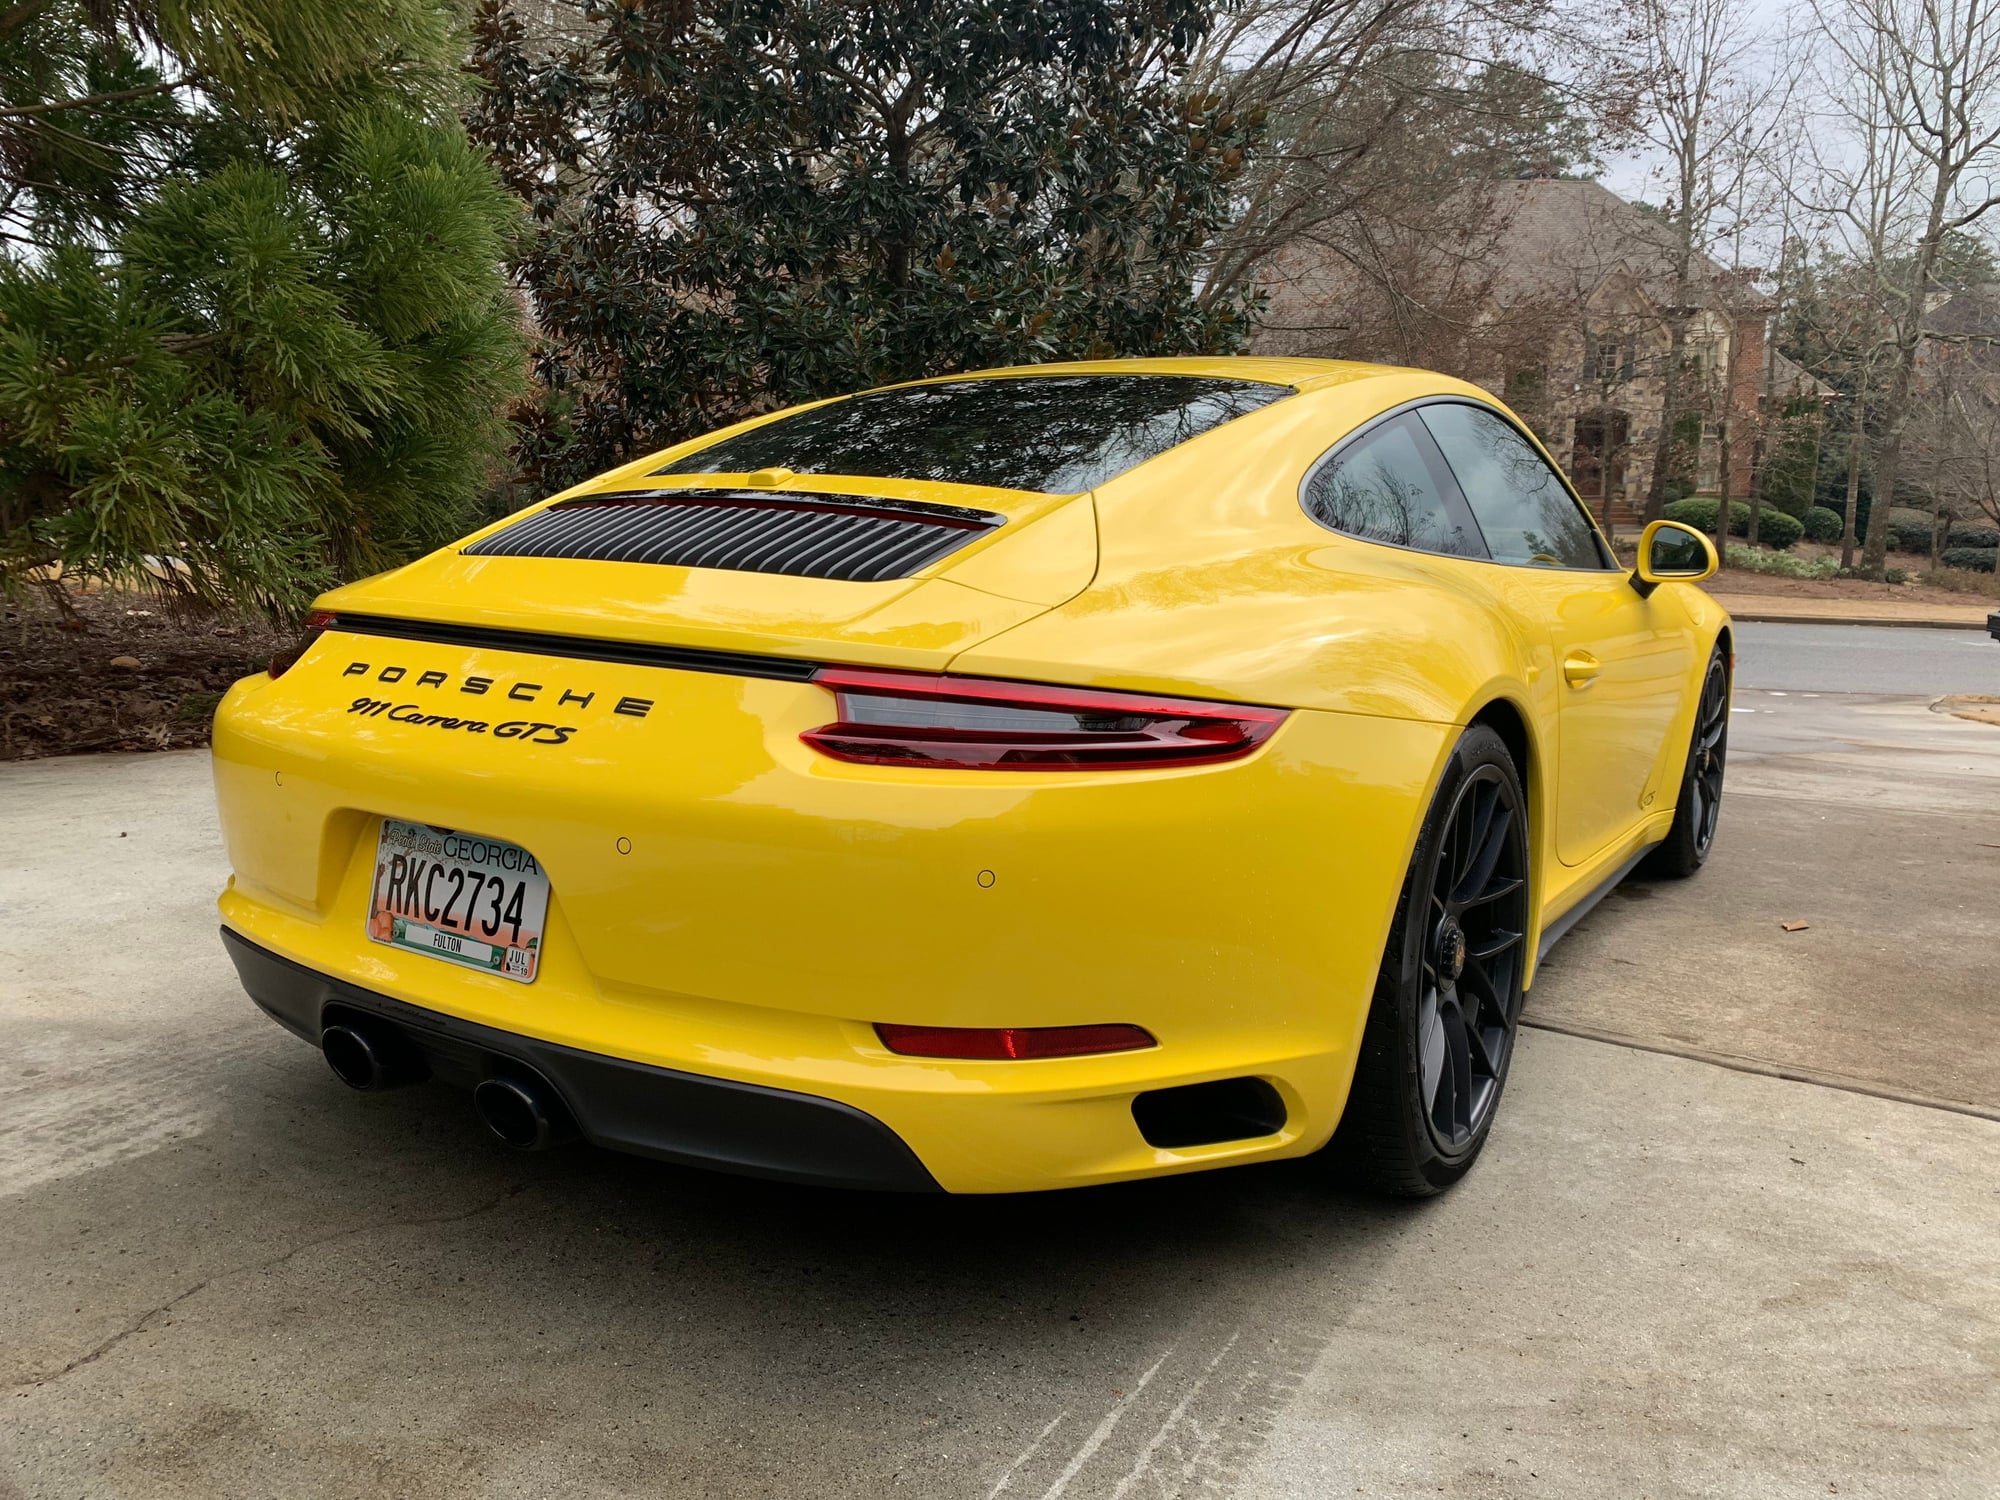 2017 Porsche 911 - Fully Loaded 2017 911 GTS Coupe Original MSRP: $158,585 - Used - VIN WP0AB2A90HS125054 - 7,800 Miles - 6 cyl - 2WD - Automatic - Coupe - Yellow - Duluth, GA 30097, United States